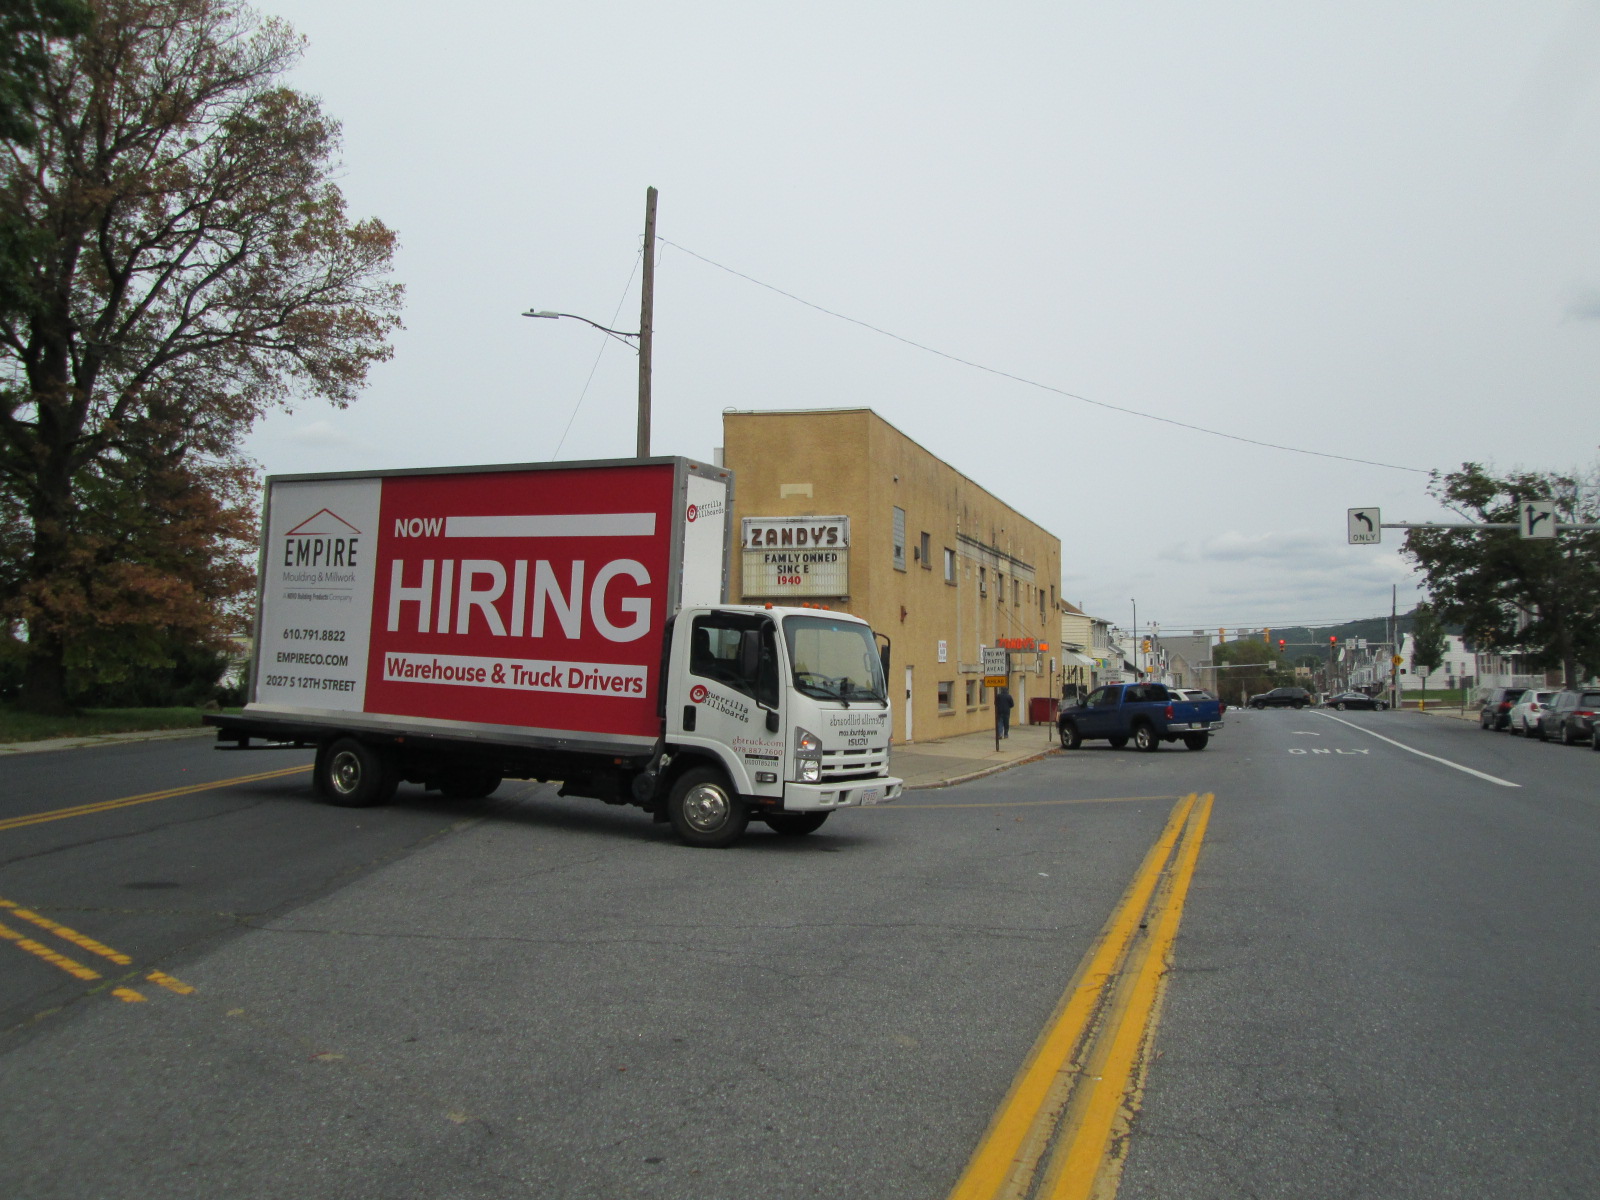 Billboard truck featuring a Now Hiring ad in Allentown PA